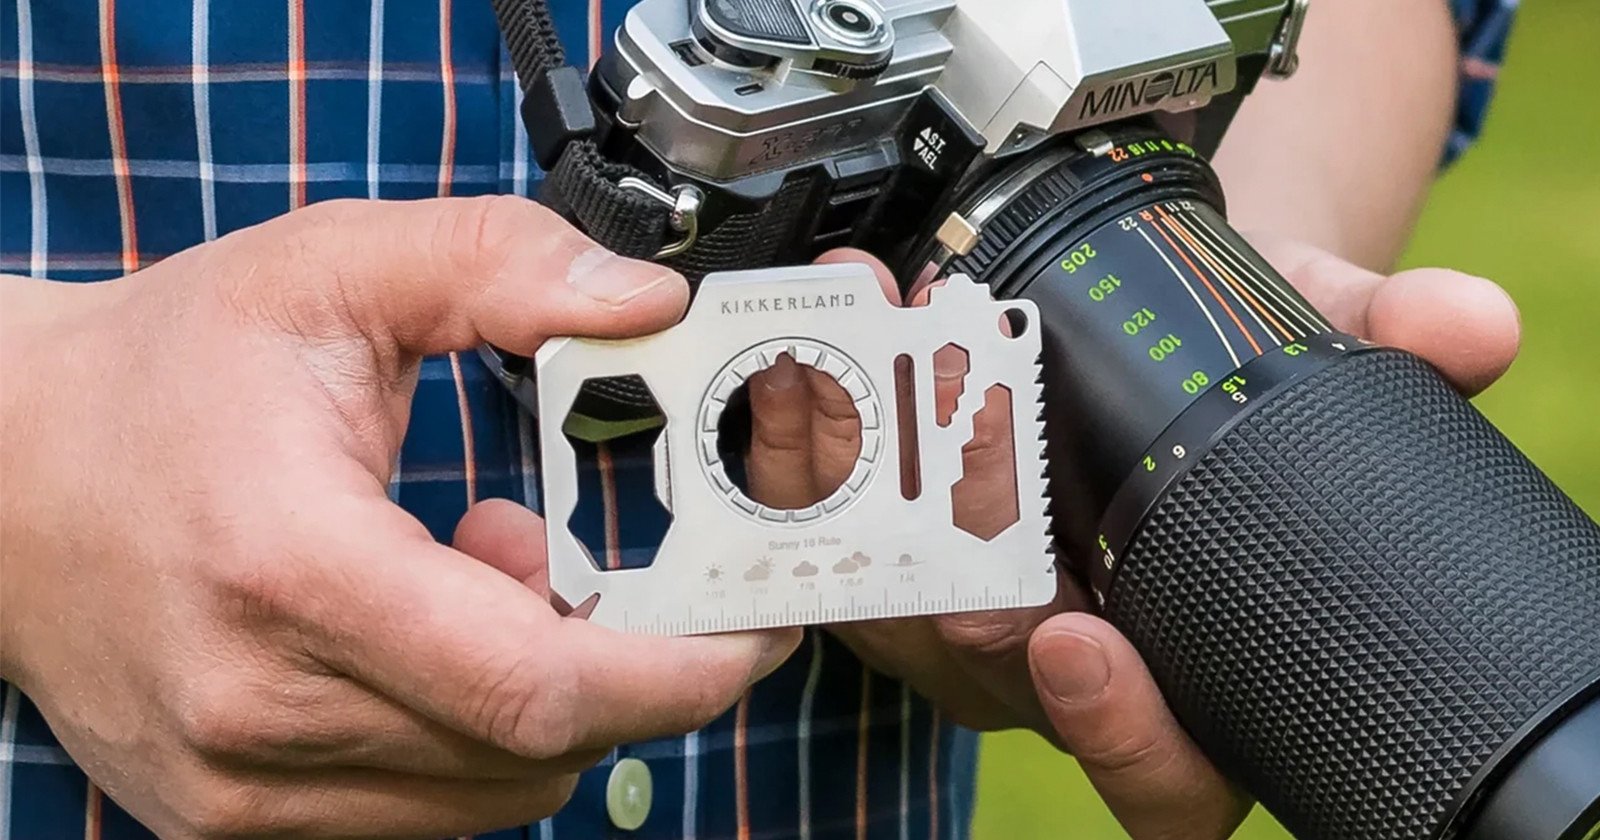  camera-shaped multi-tool squeezes tools into tiny package 